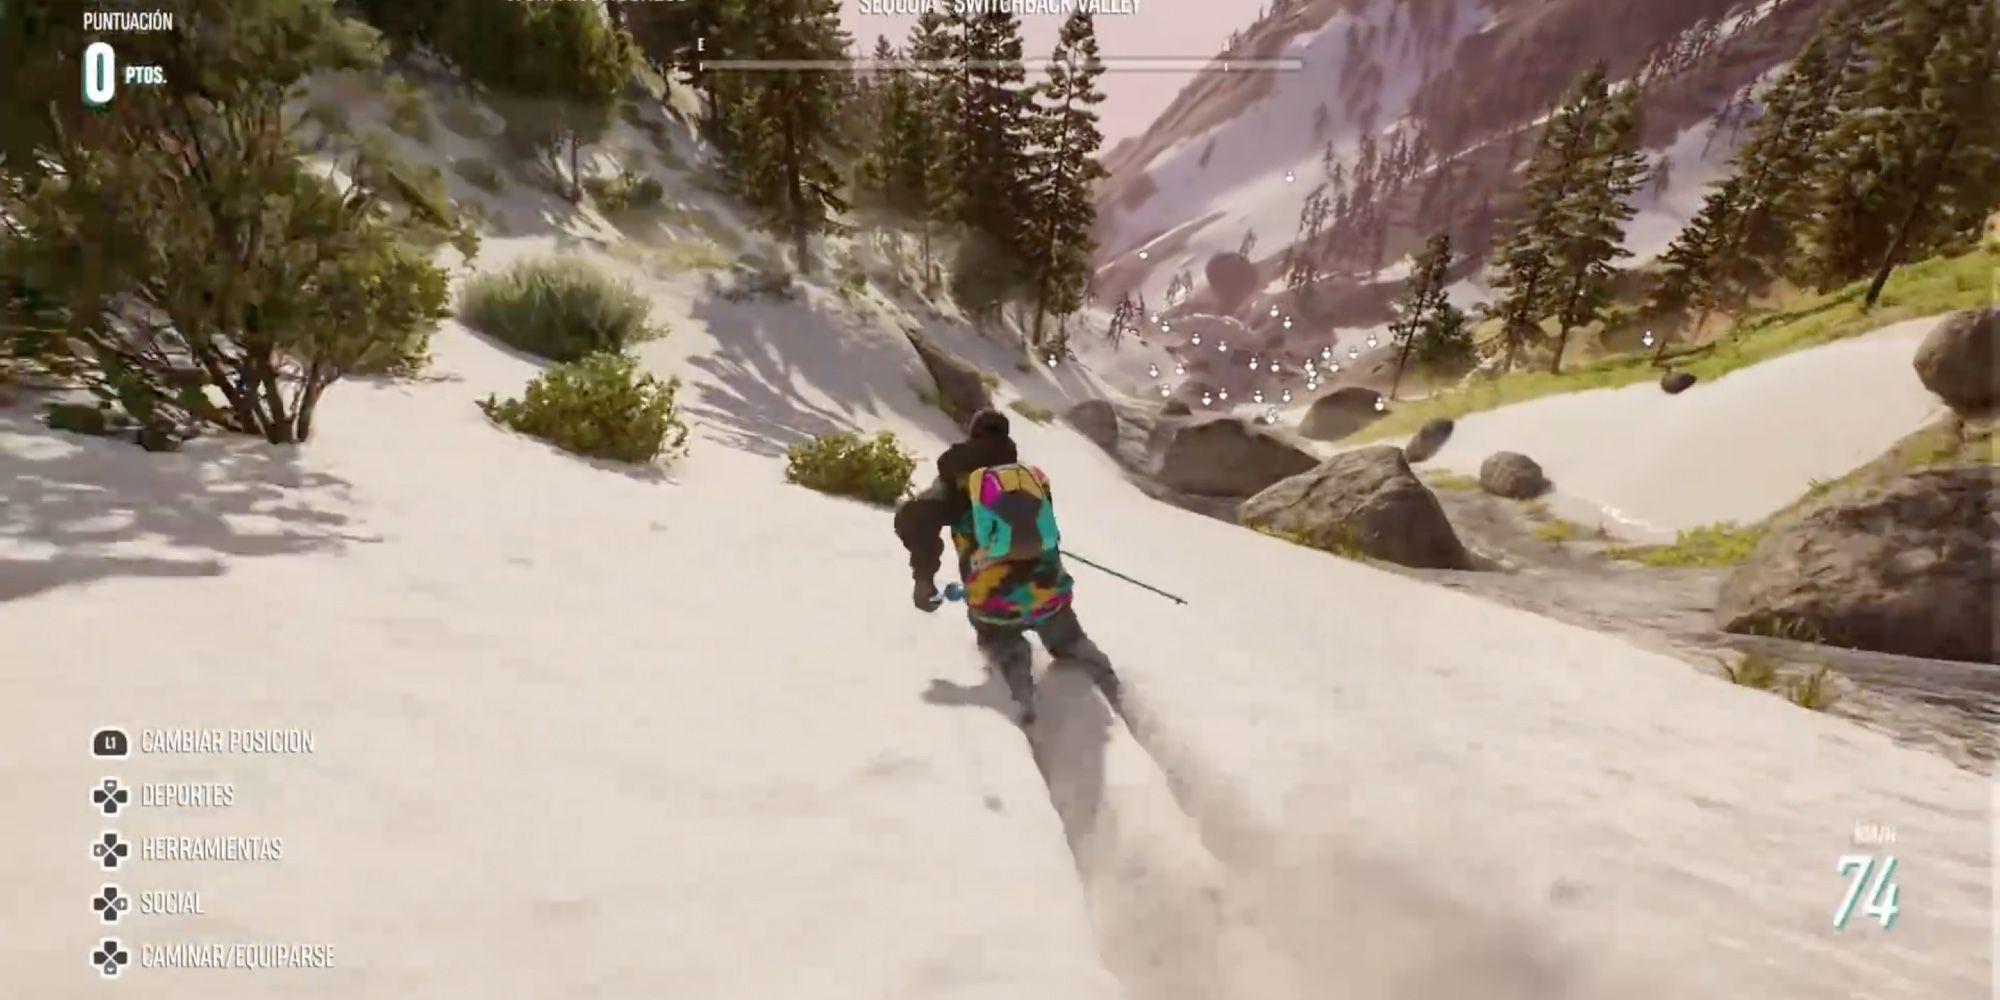 Most Realistic Racing Games - Riders Republic - Player races along the mountain slope